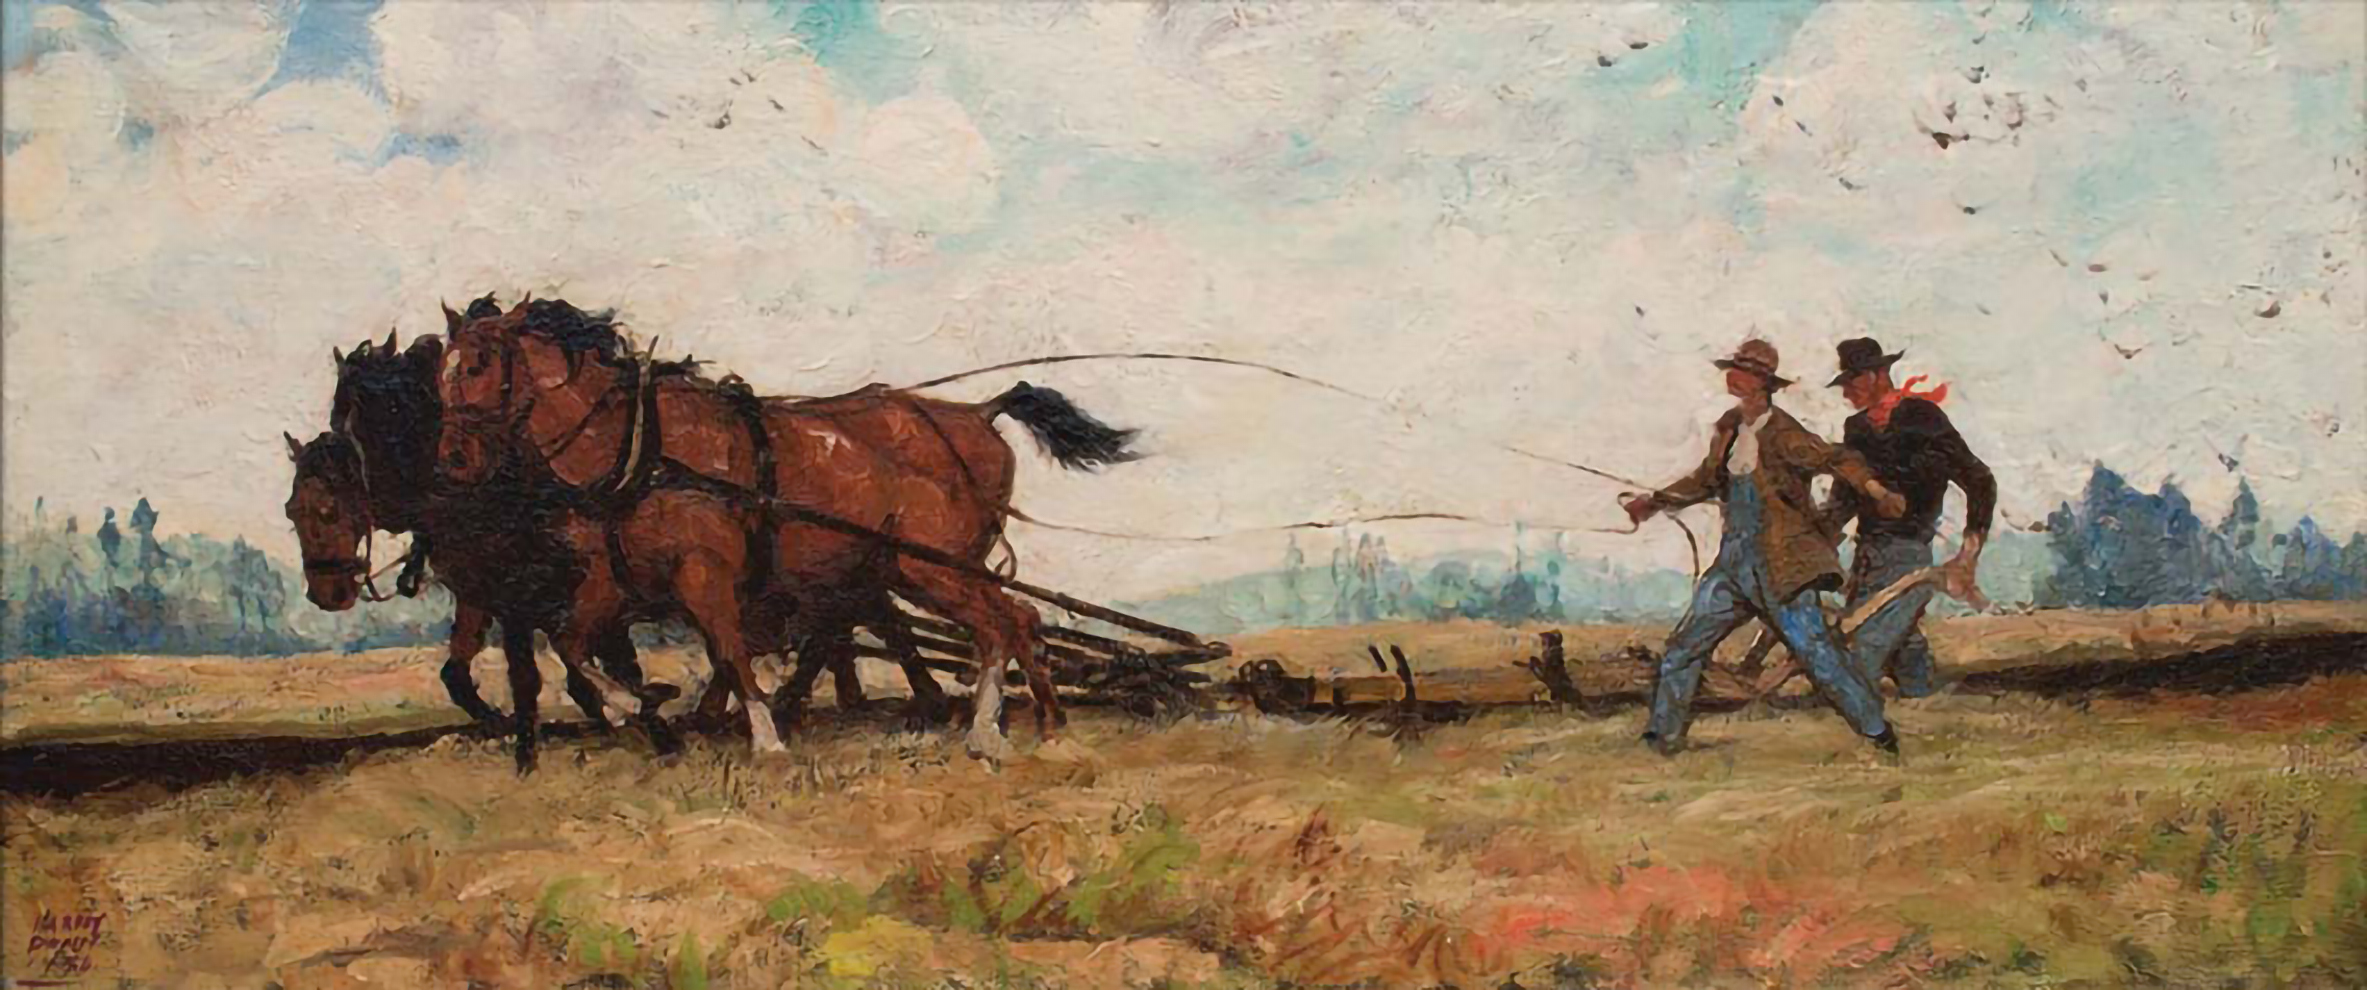 “Sons of the Frontier,” circa 1940, by Harvey Dunn (1884–1952).